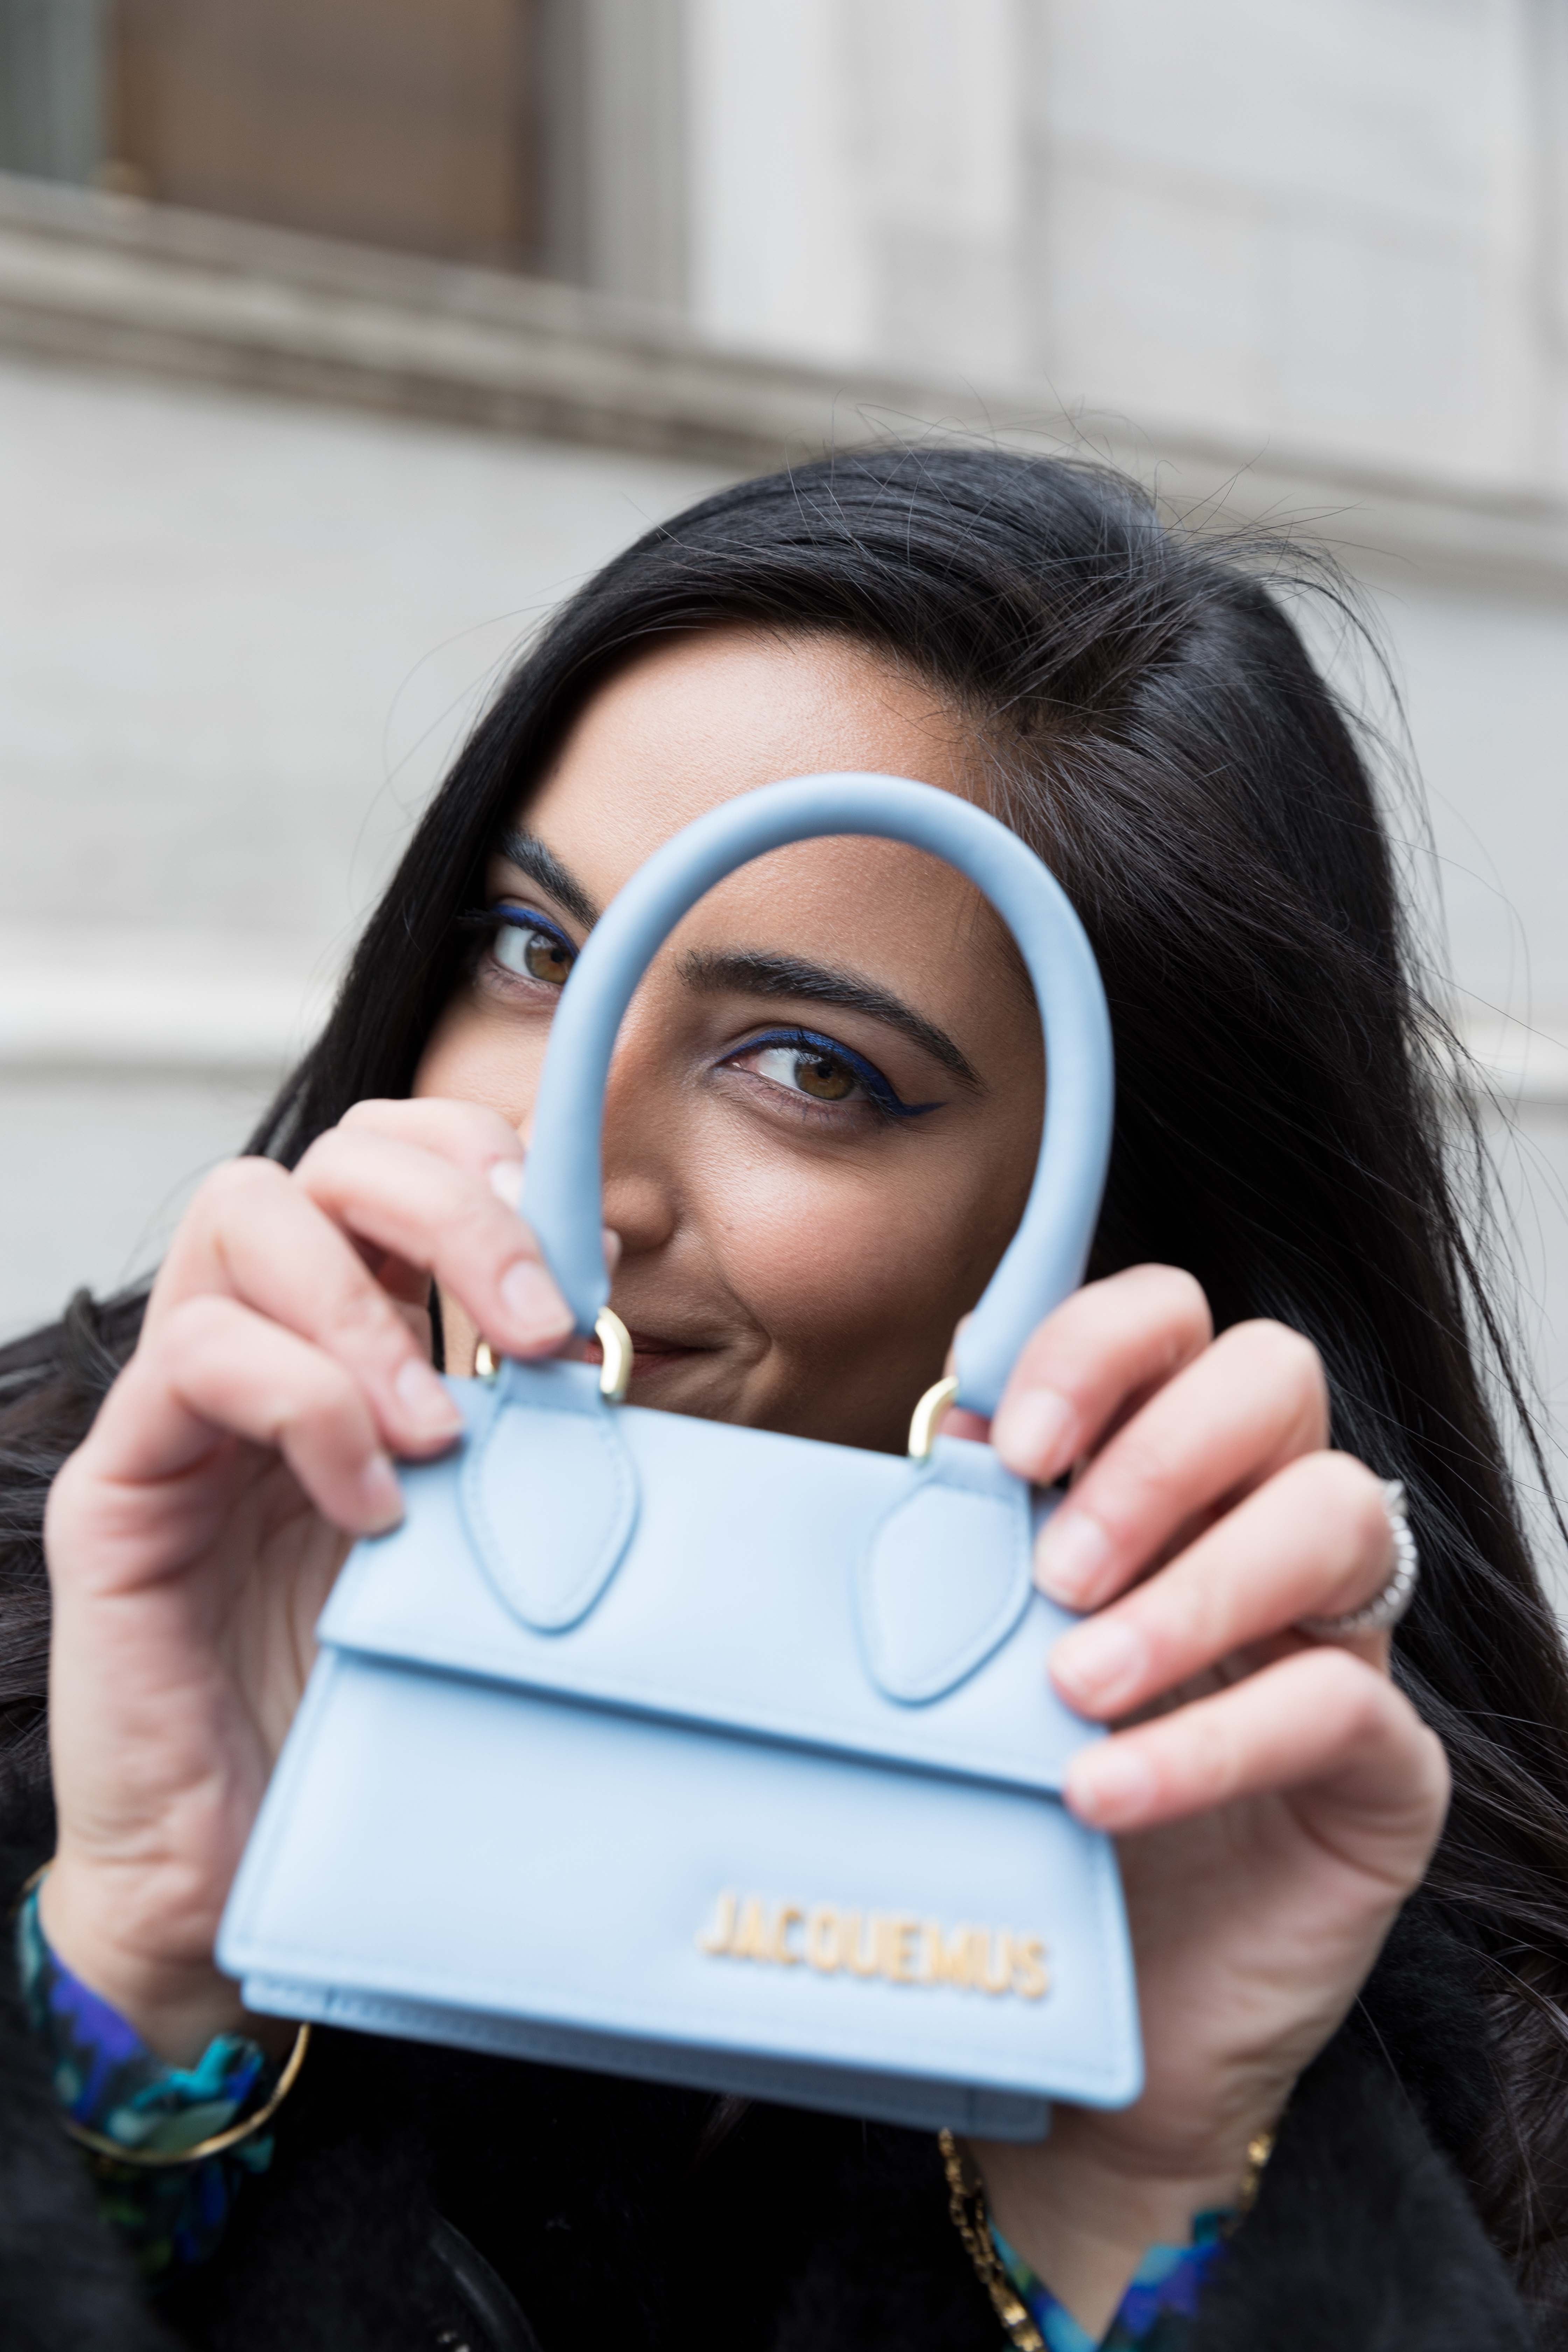 Micro-bag trend: The tiniest micro-bags in fashion and what to put in them